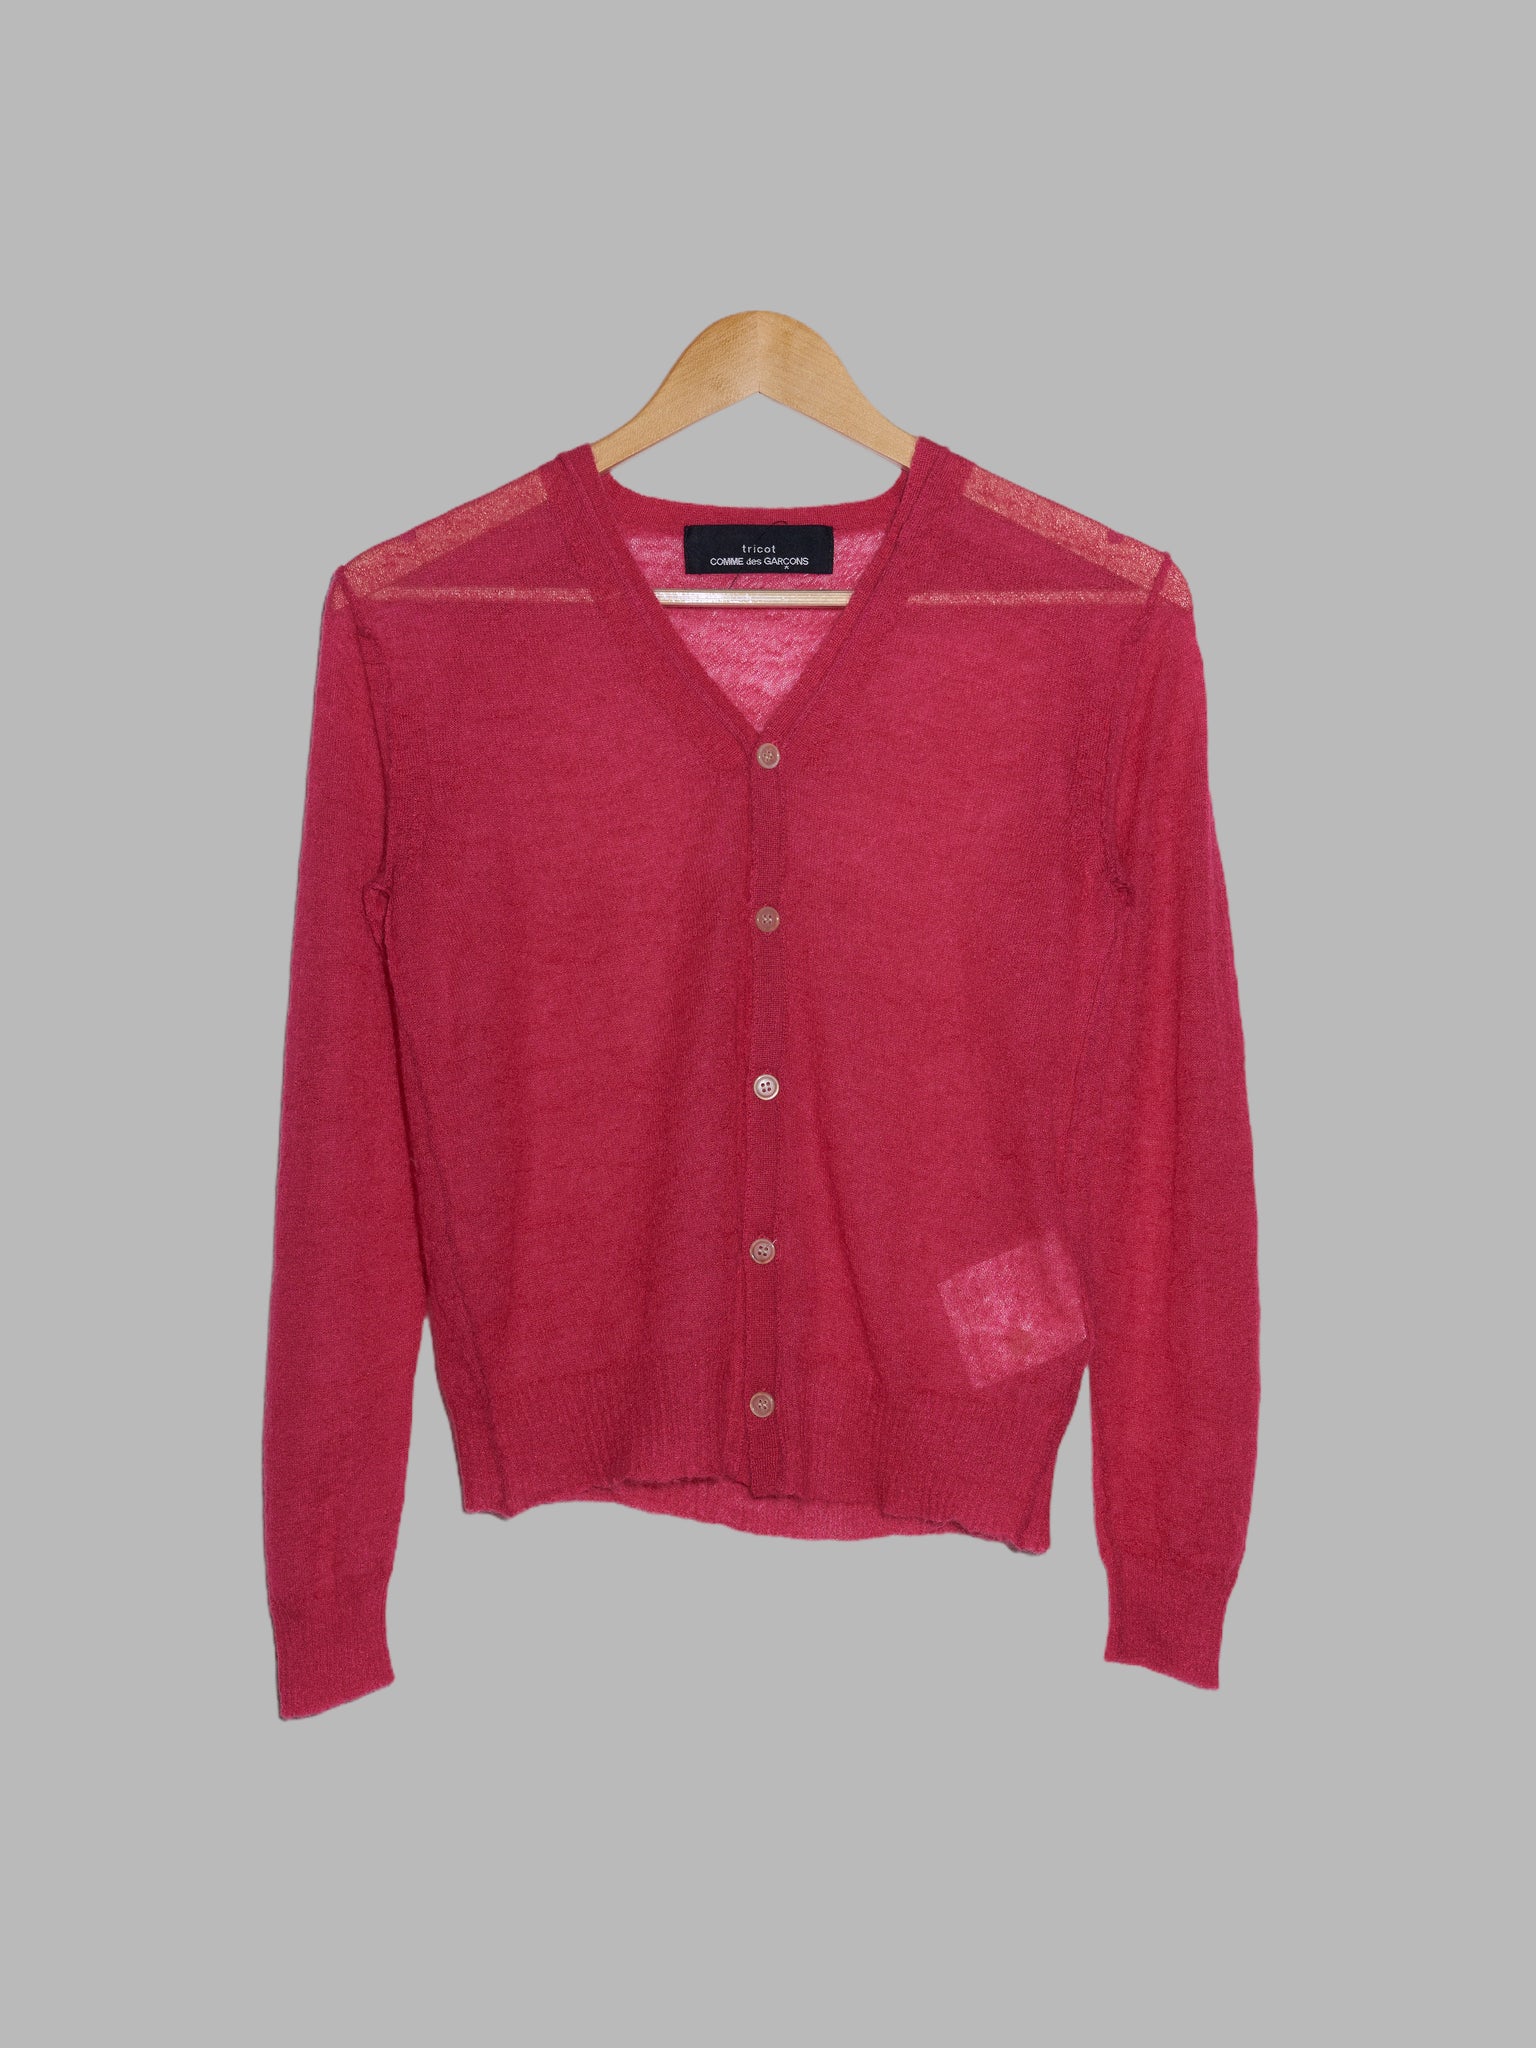 Tricot Comme des Garcons 2007 pink sheer mohair cardigan